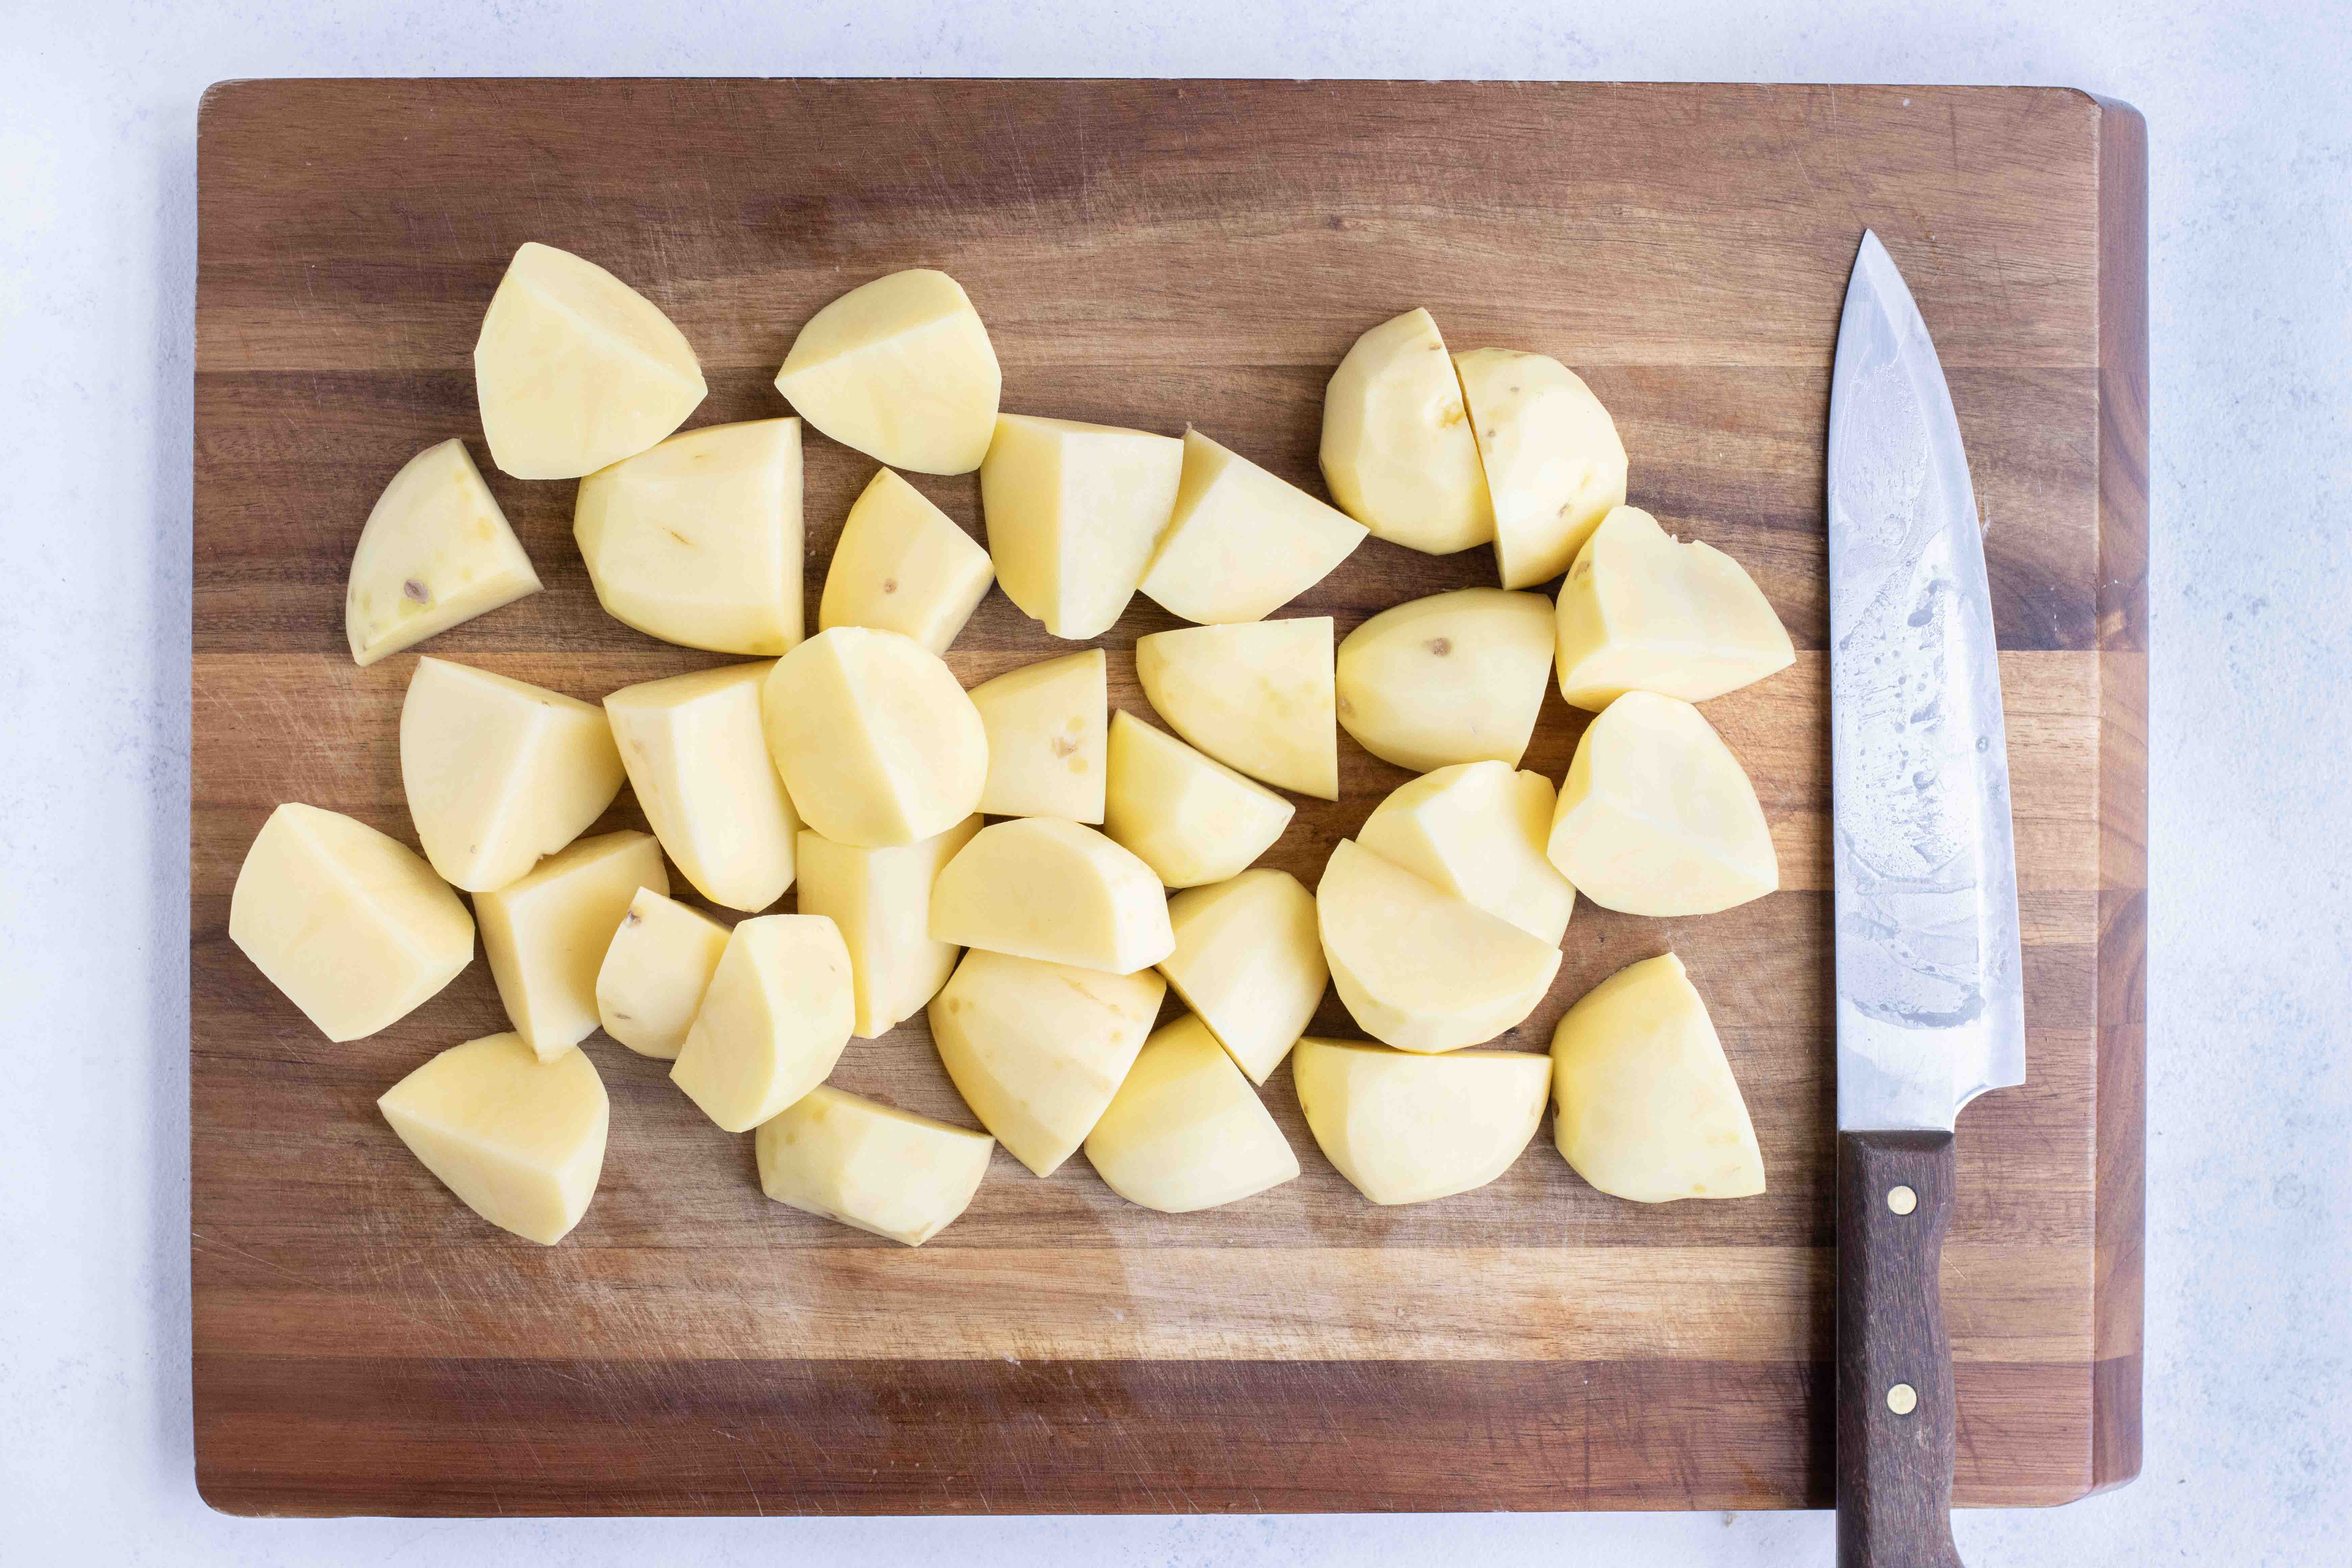 Cubed potatoes are set on the cutting board by a knife.